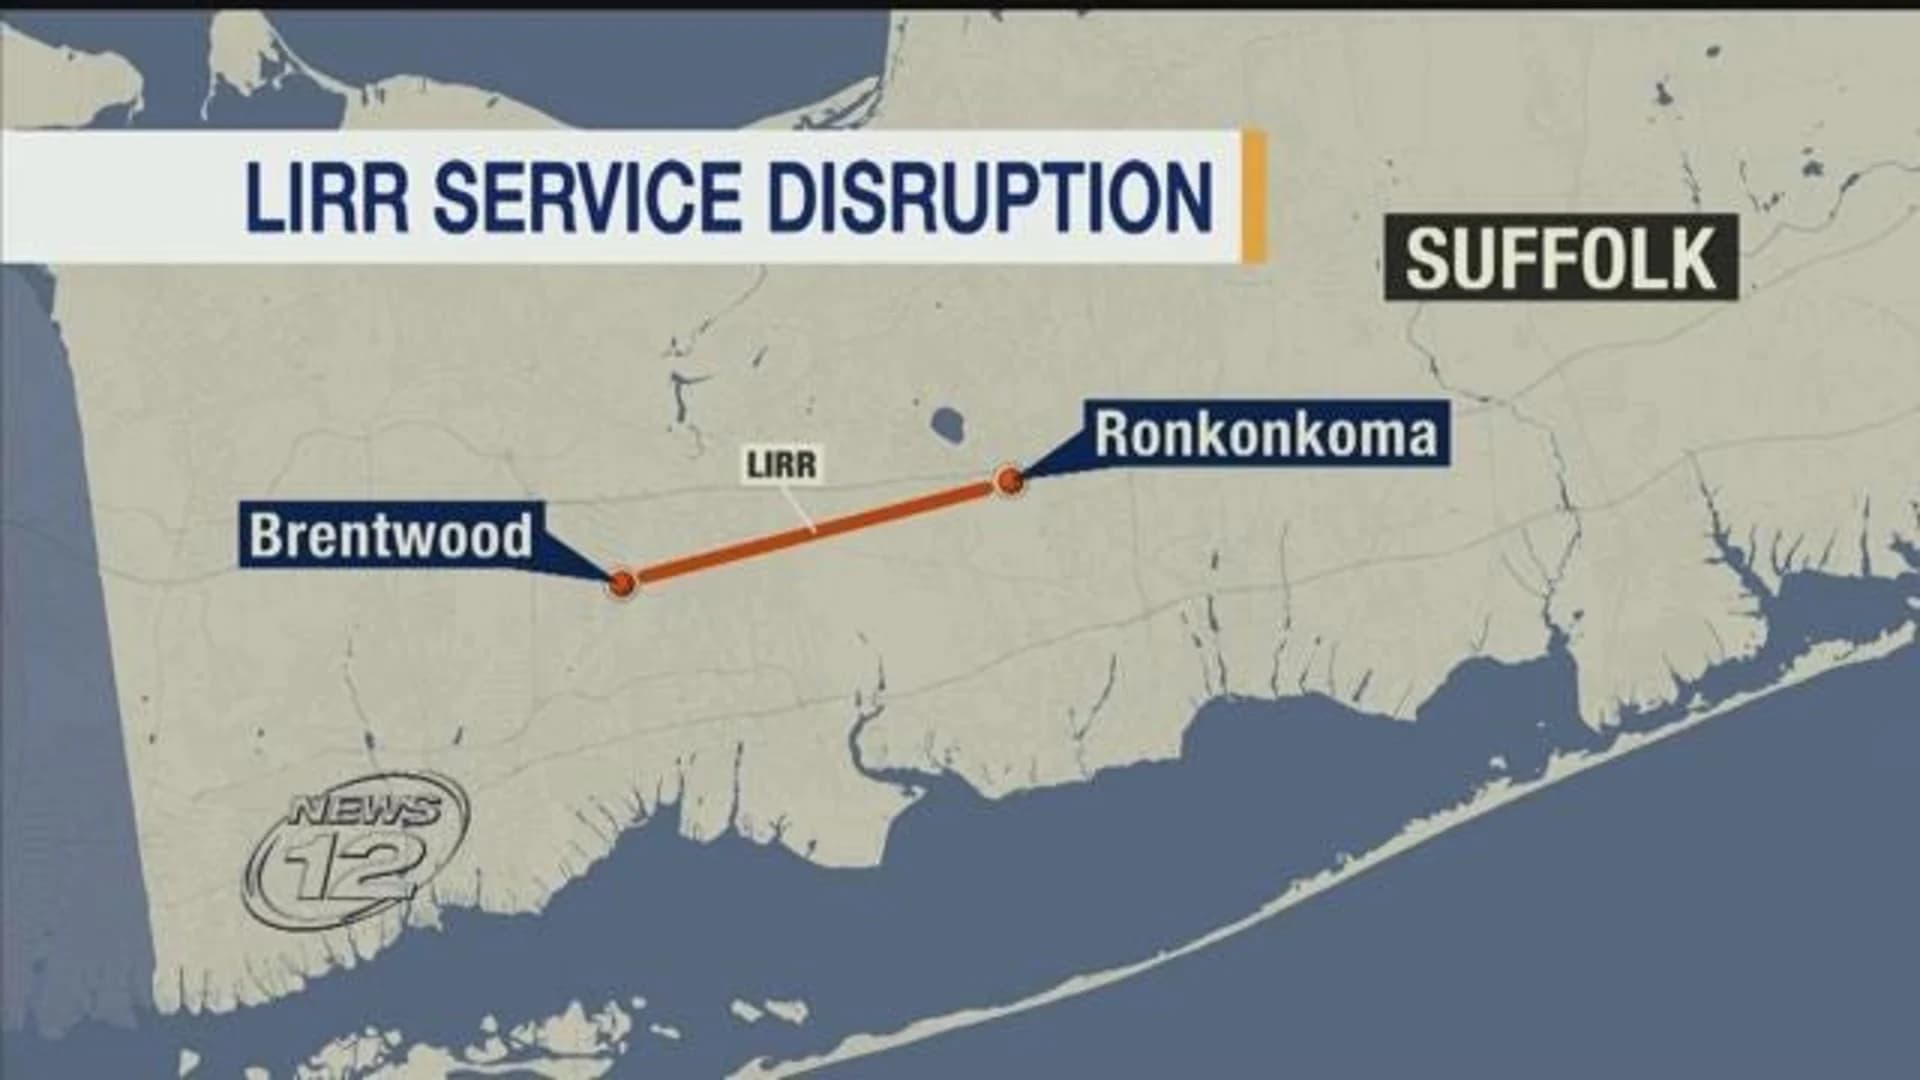 Buses replace trains for leg of LIRR line due to track work